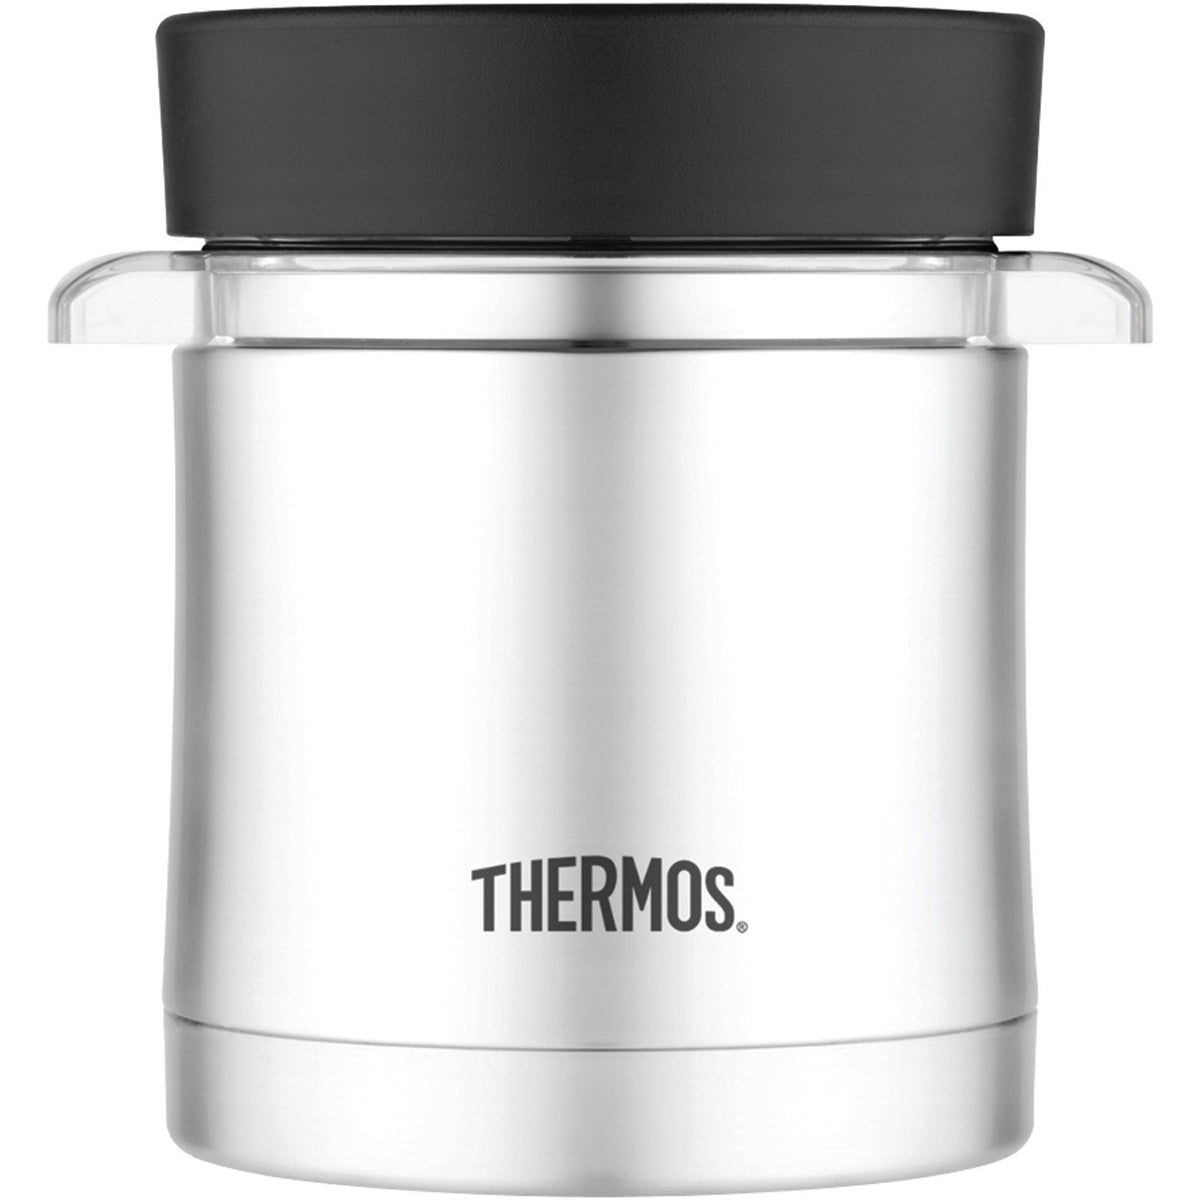 Thermos 12 oz. Stainless Steel Food Jar w/ Microwavable Container - Silver/Black Thermos